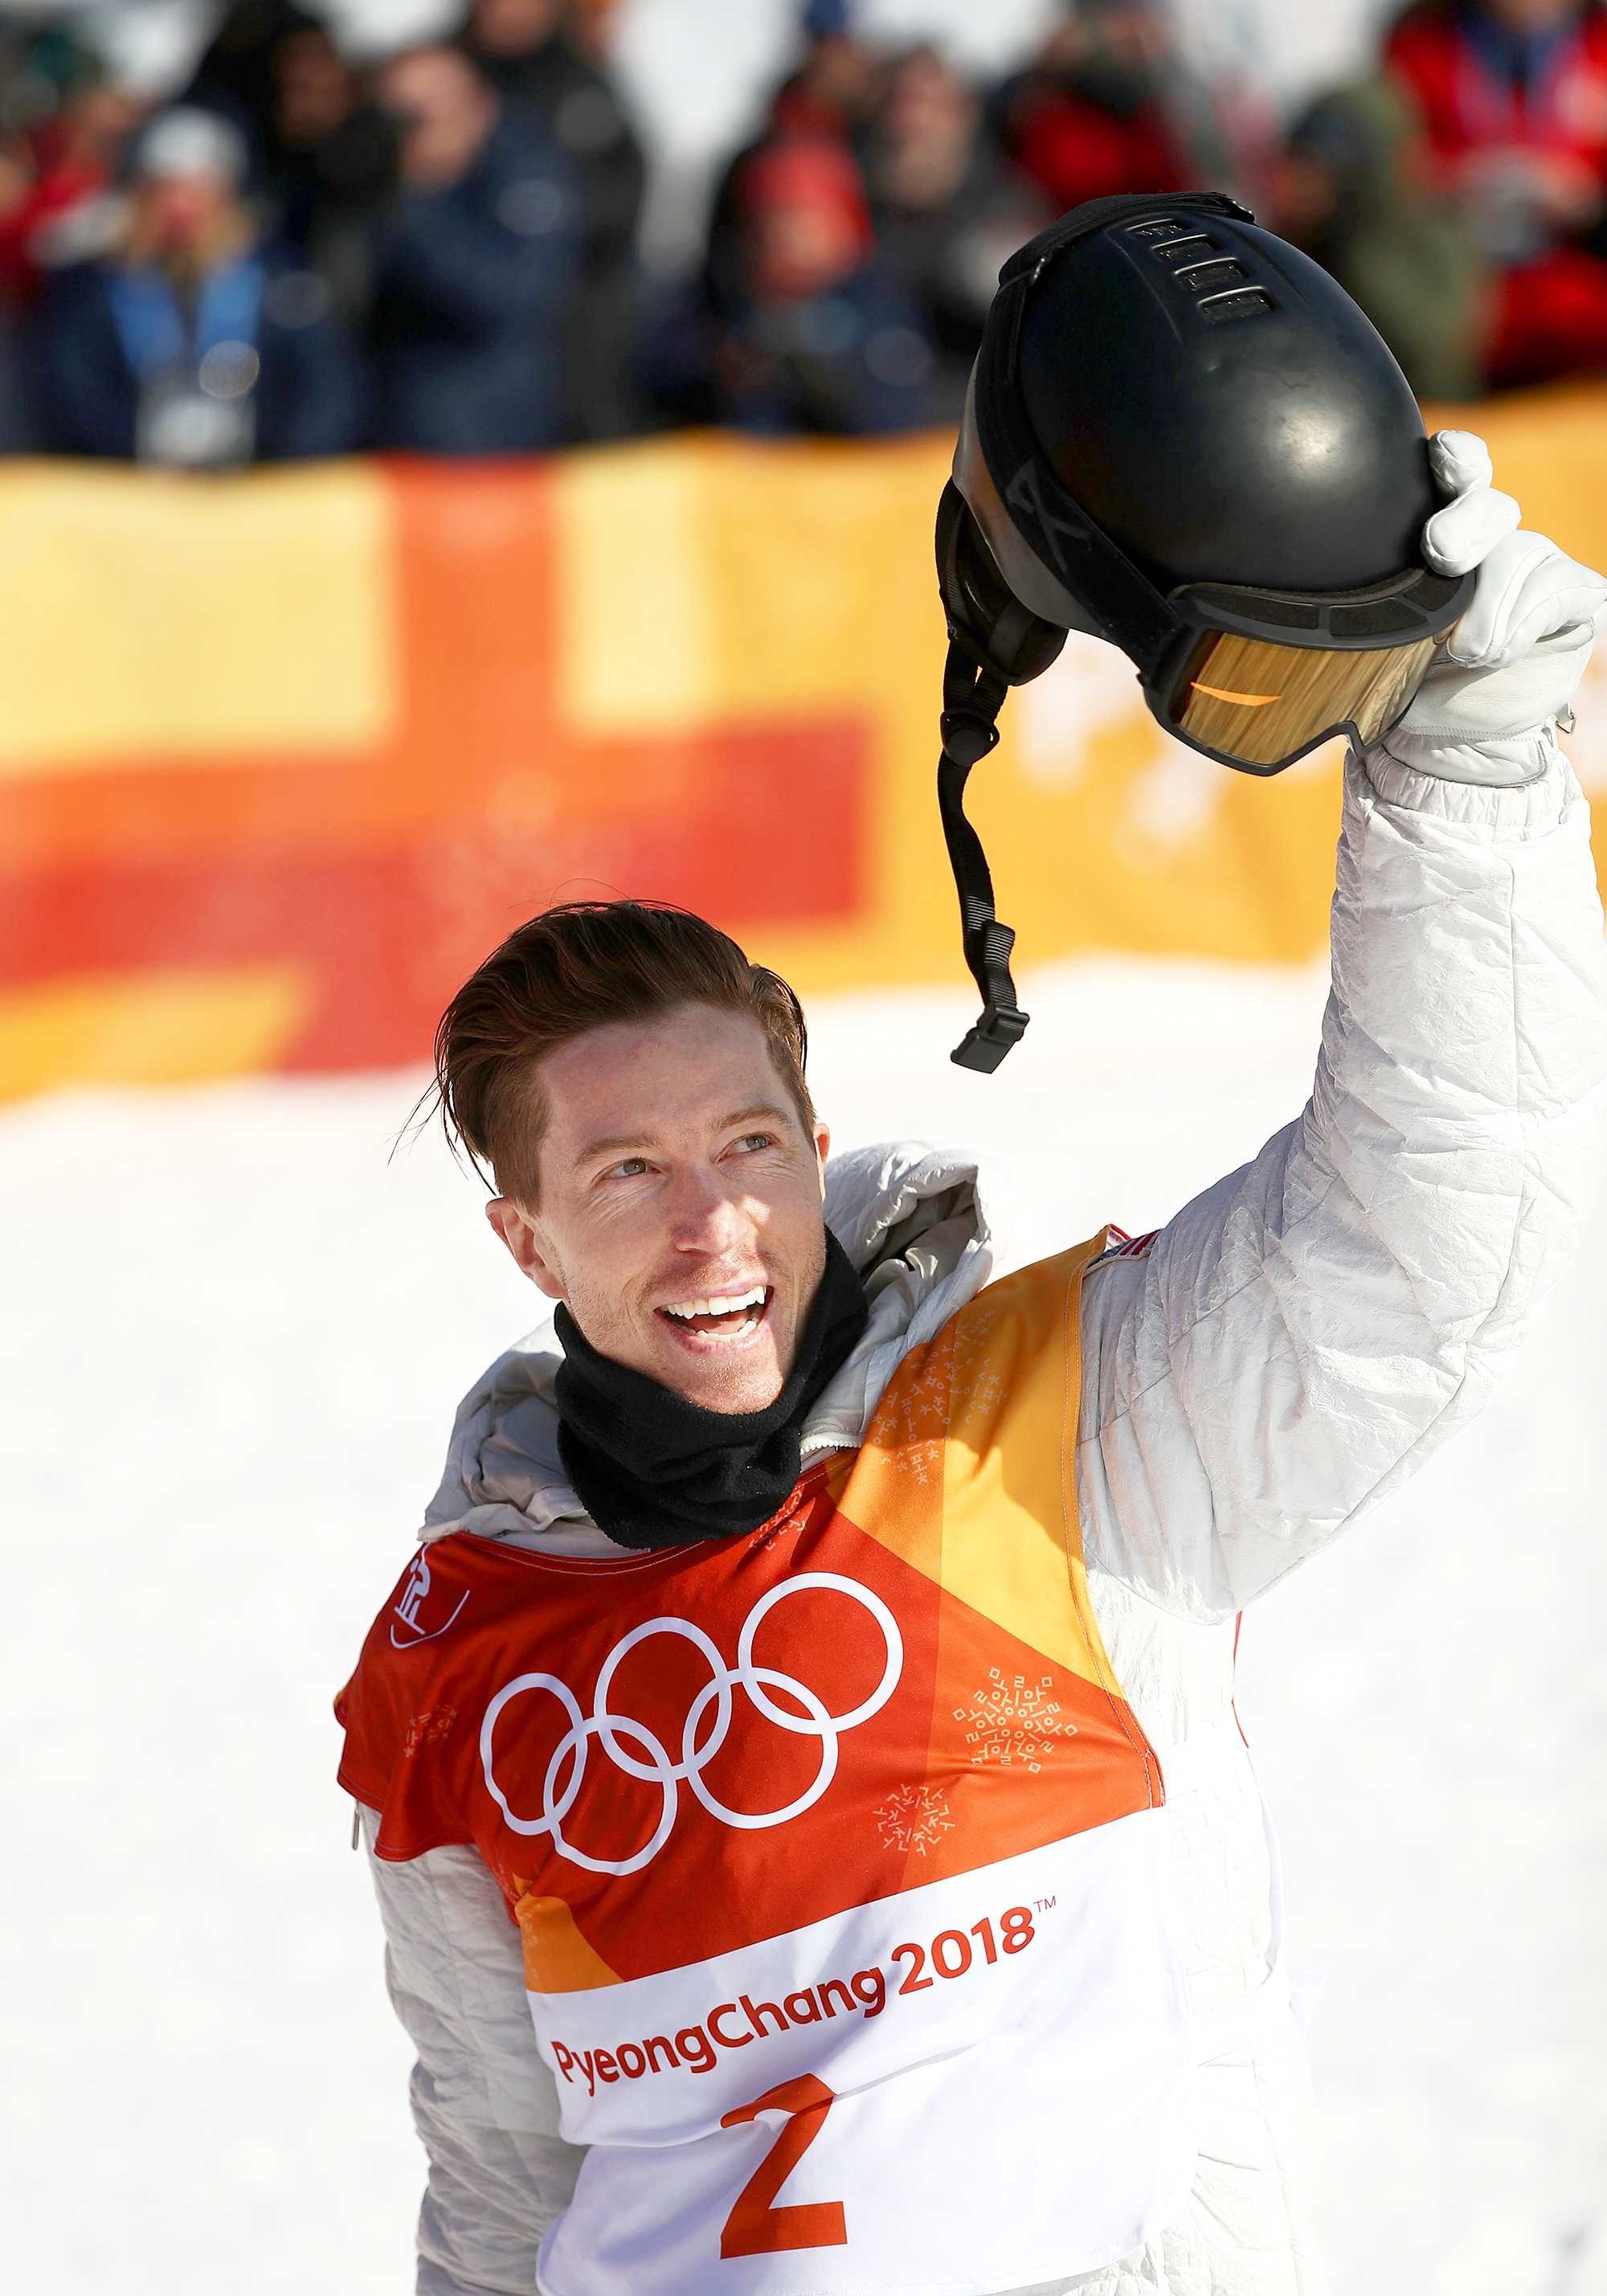 Shaun White Qualifies for Halfpipe Final After All-or-Nothing Second Run